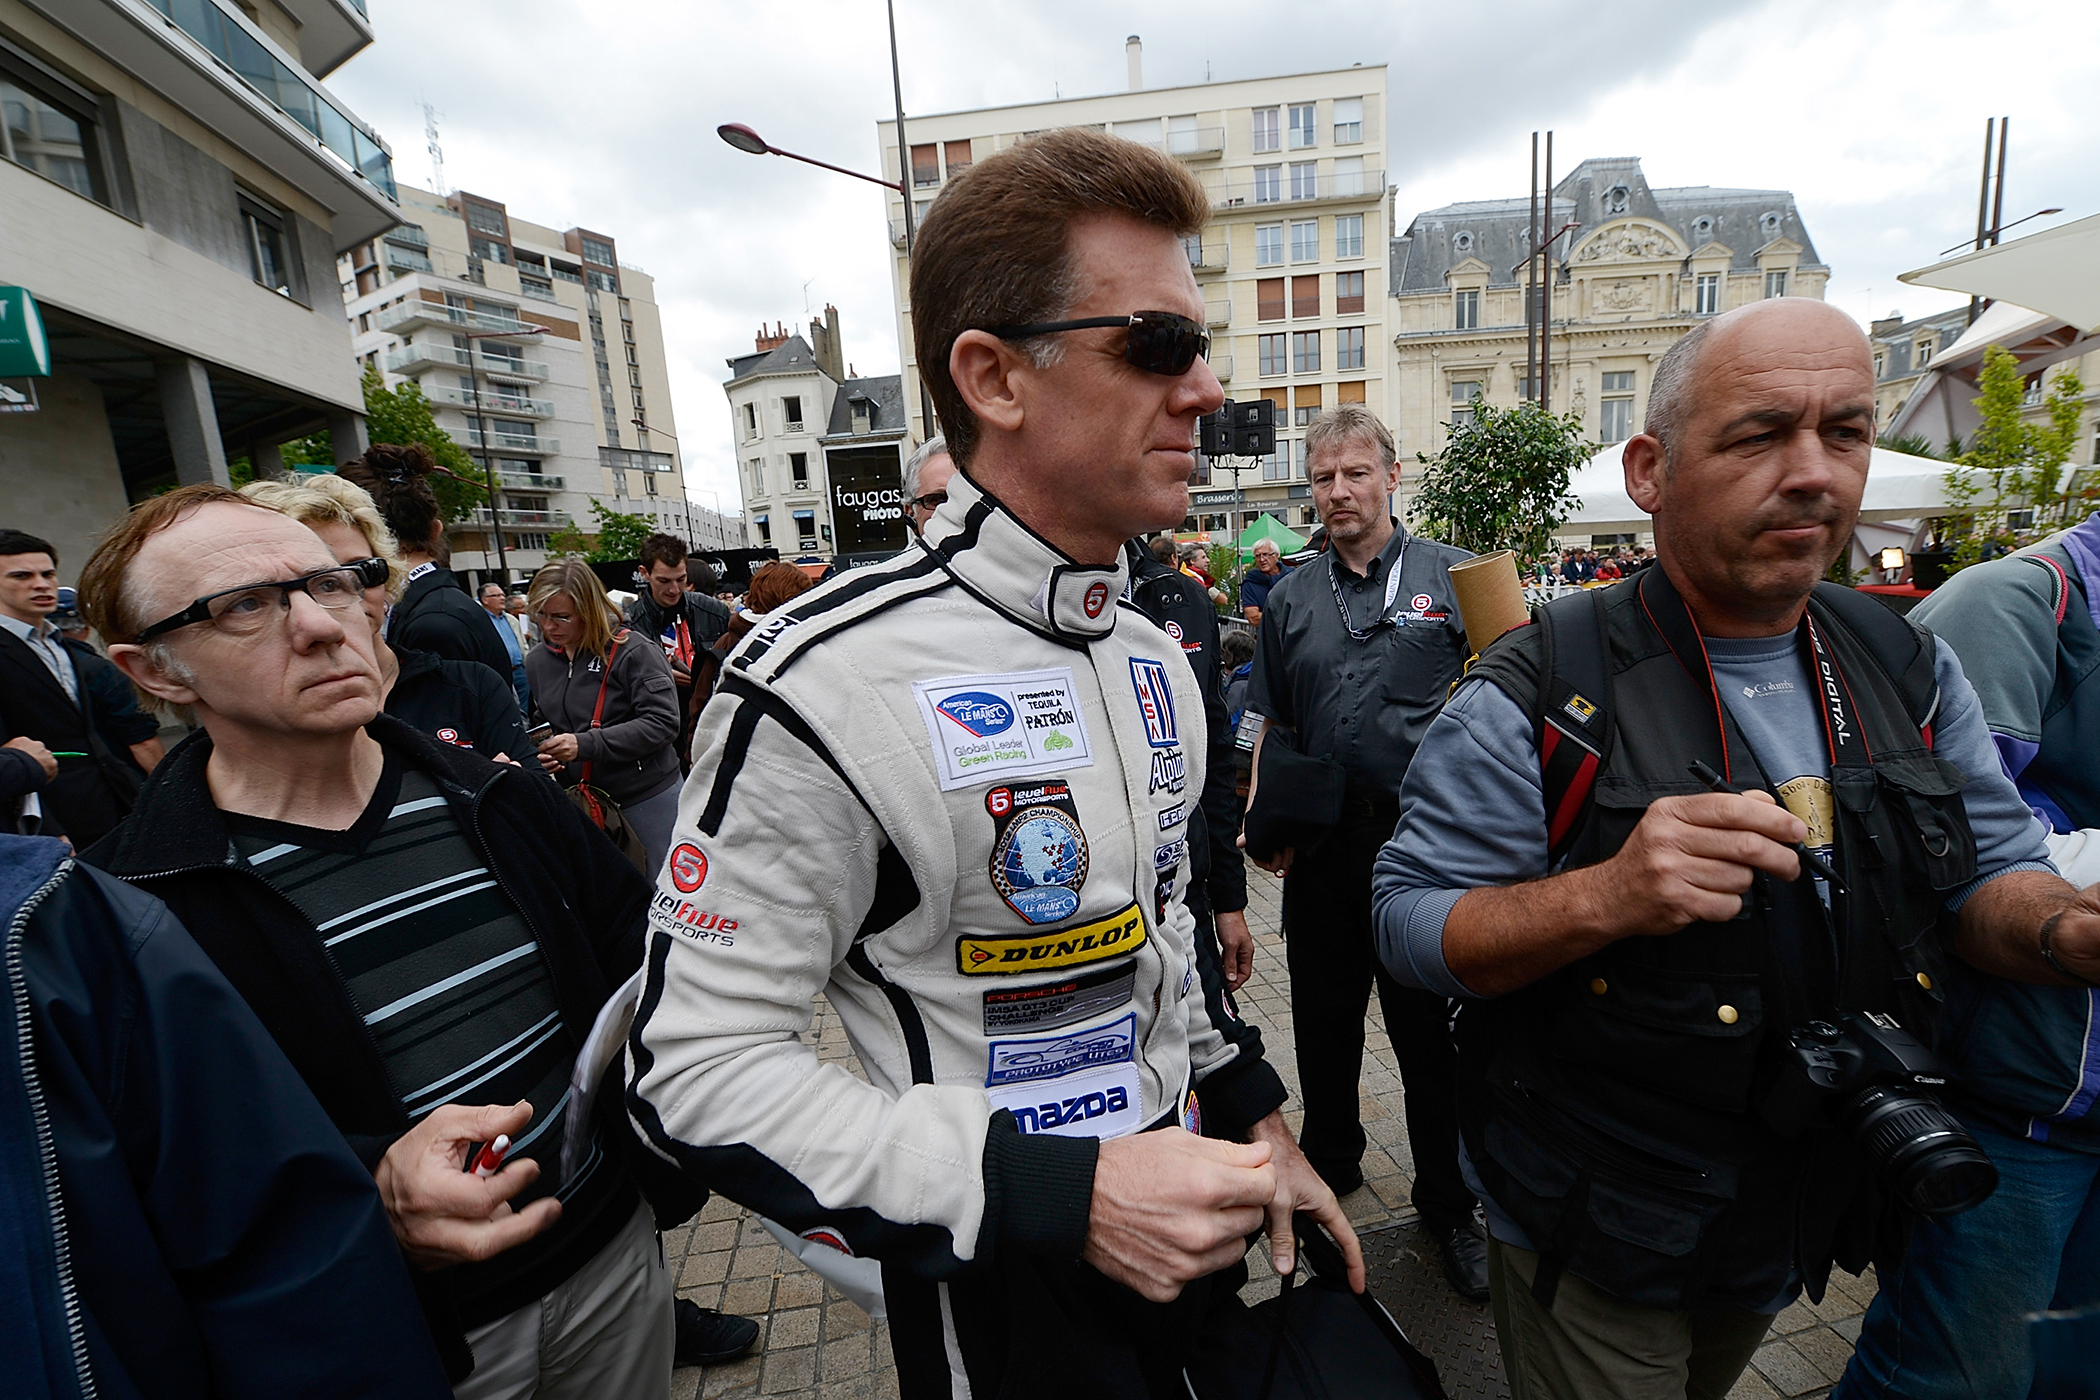 Race Car Driver Scott Tucker Indicted in Massive Payday Lending Scam